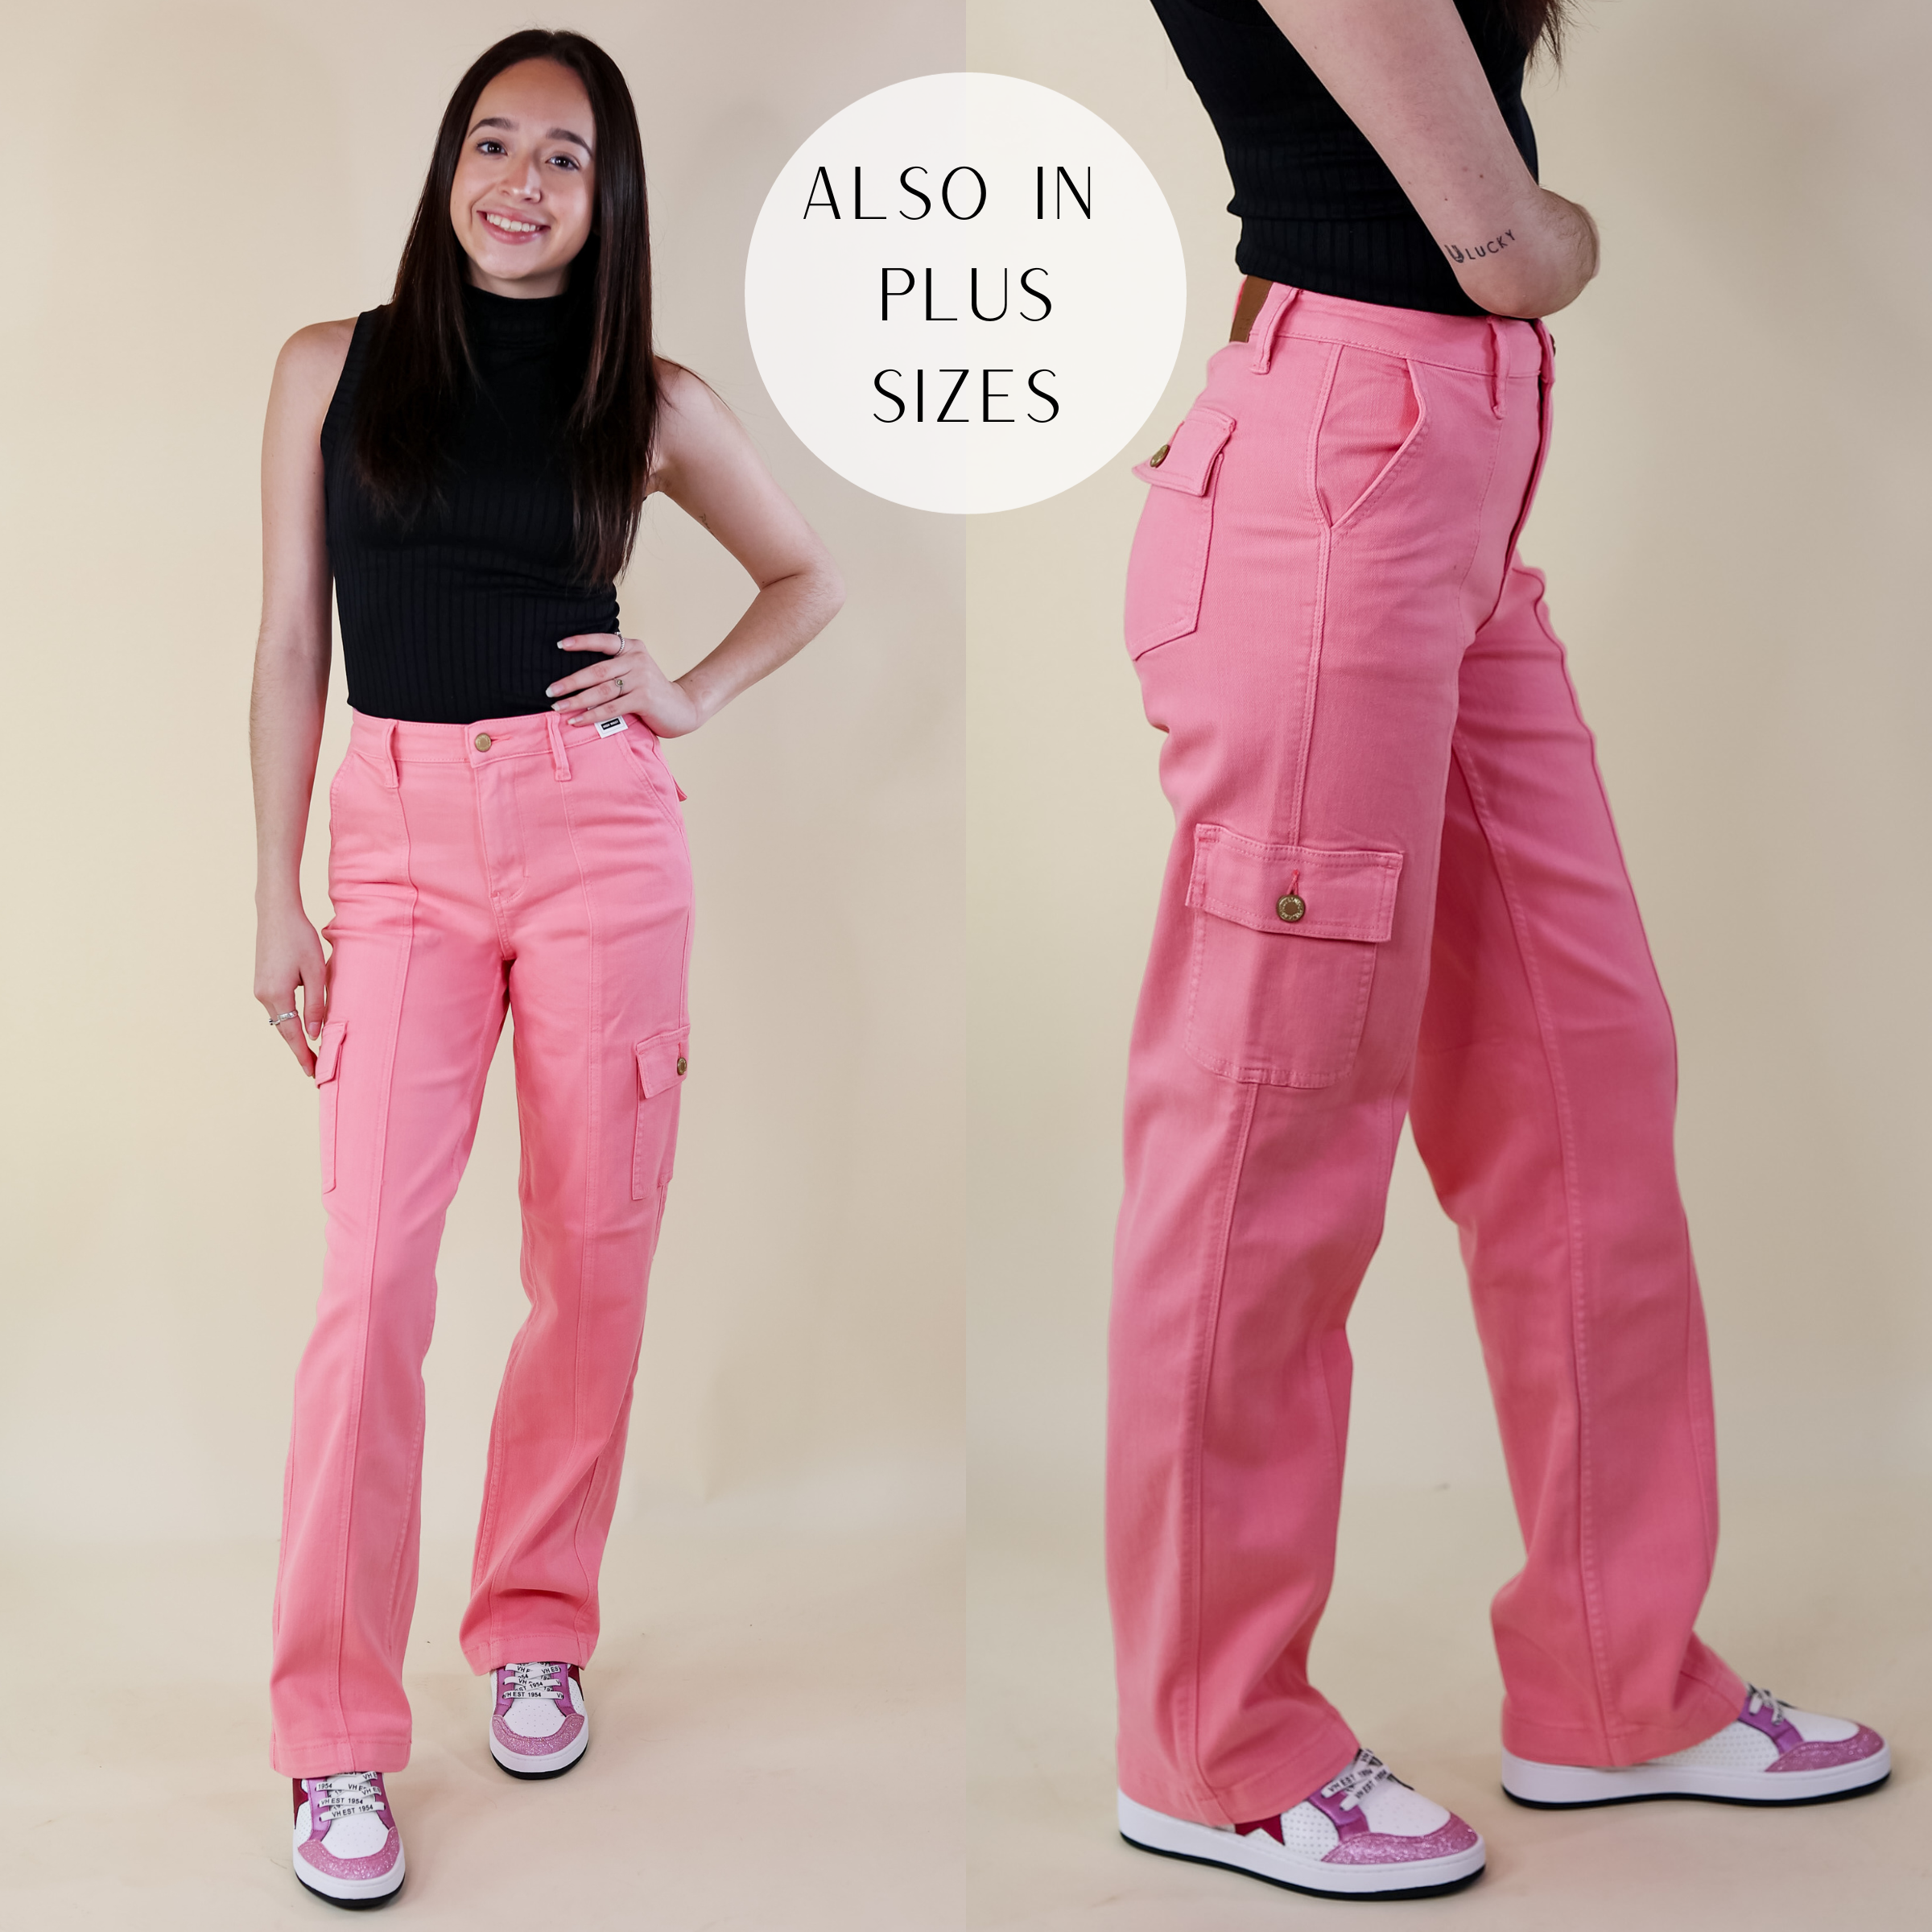 Judy Blue | Chic Efforts Cargo Straight Leg Jeans in Pink Wash - Giddy Up Glamour Boutique